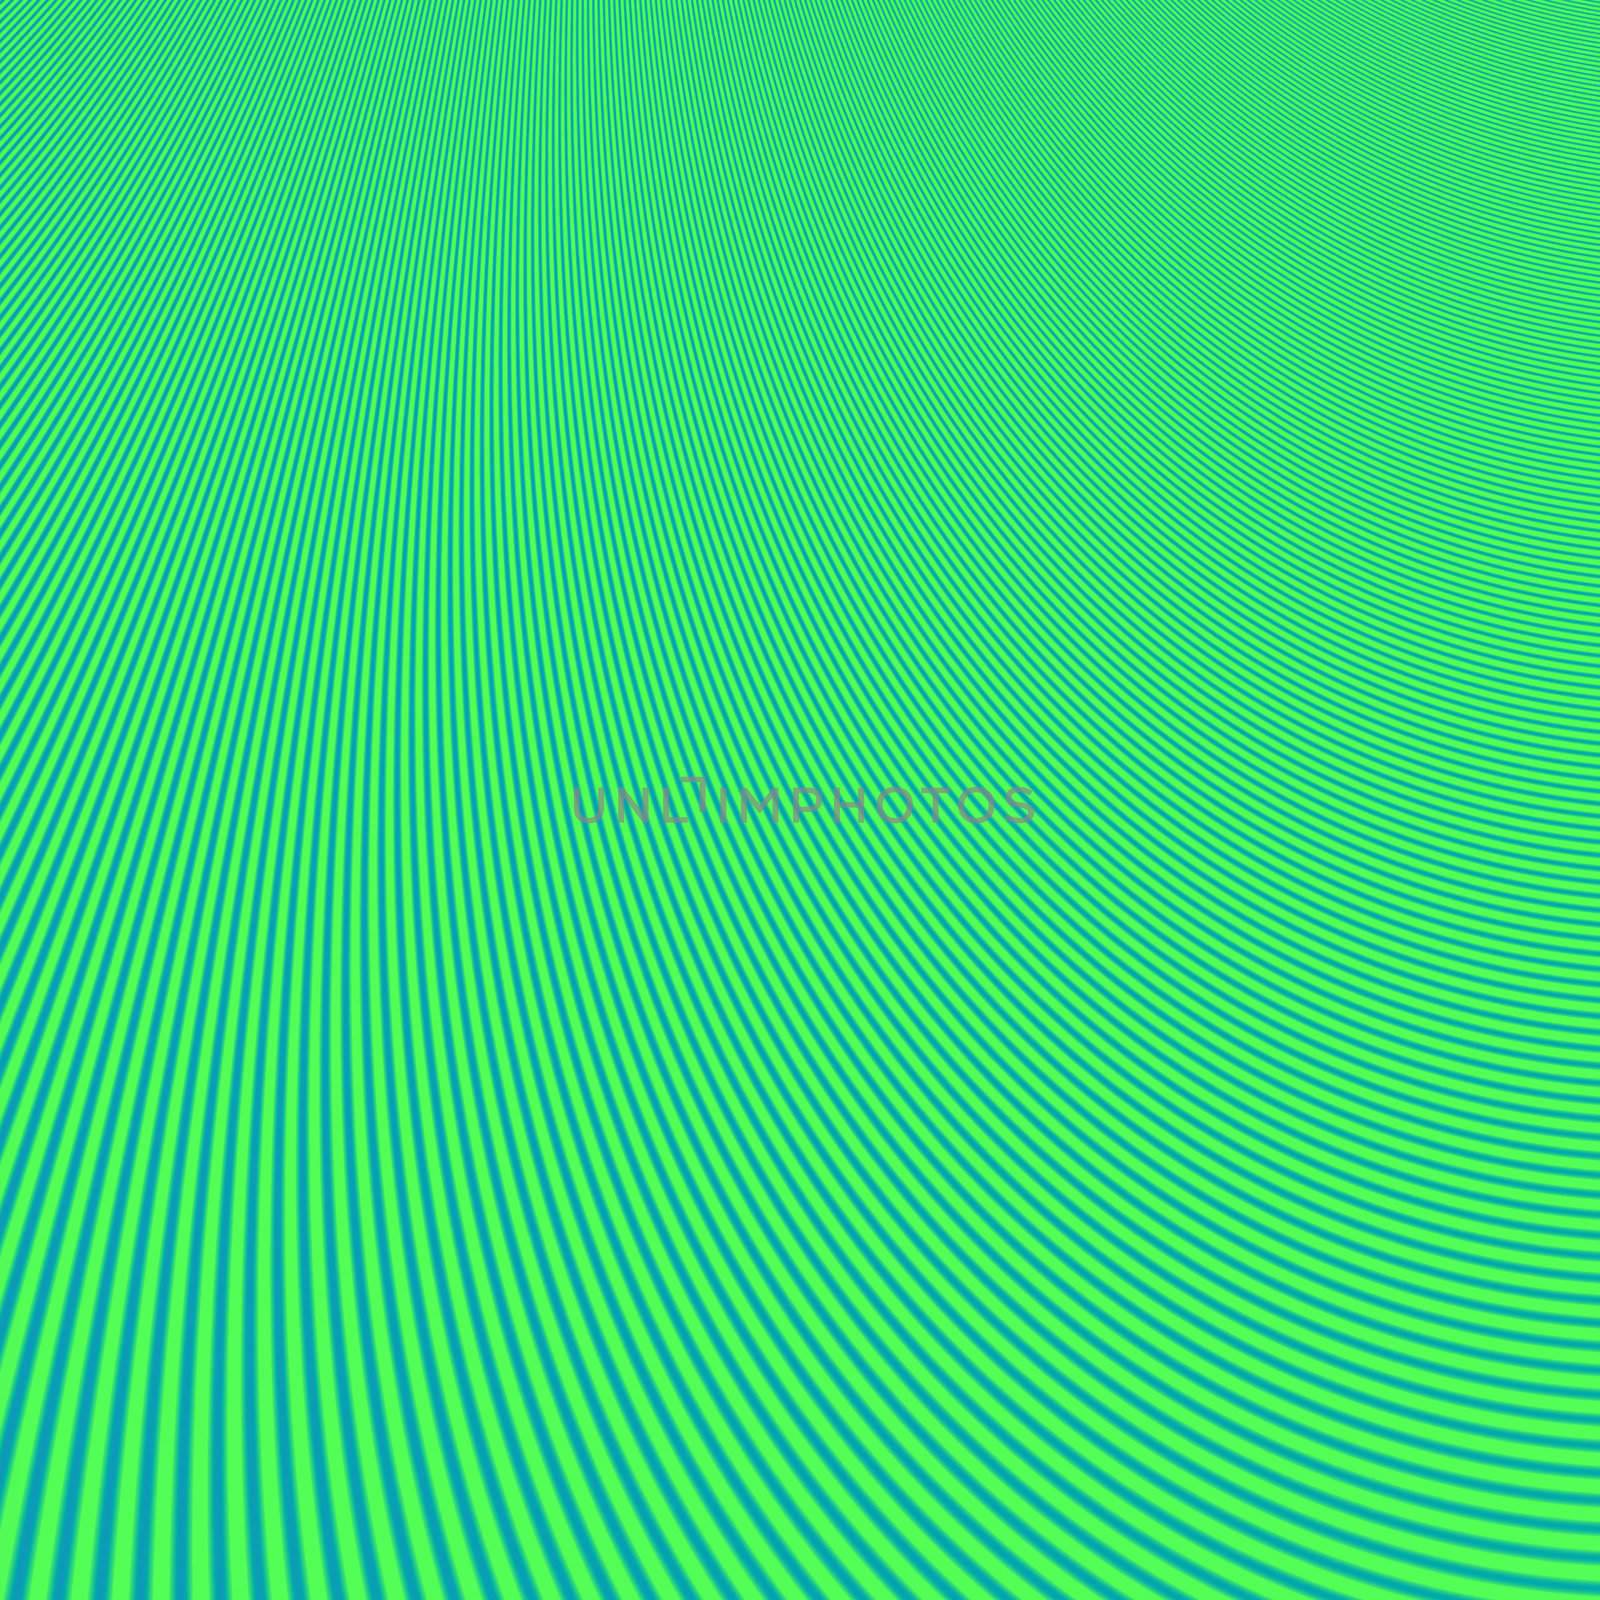 Abstract green and azure fractal background, stripes theme. Thumbnail may contain moire not existing on fullsize picture.